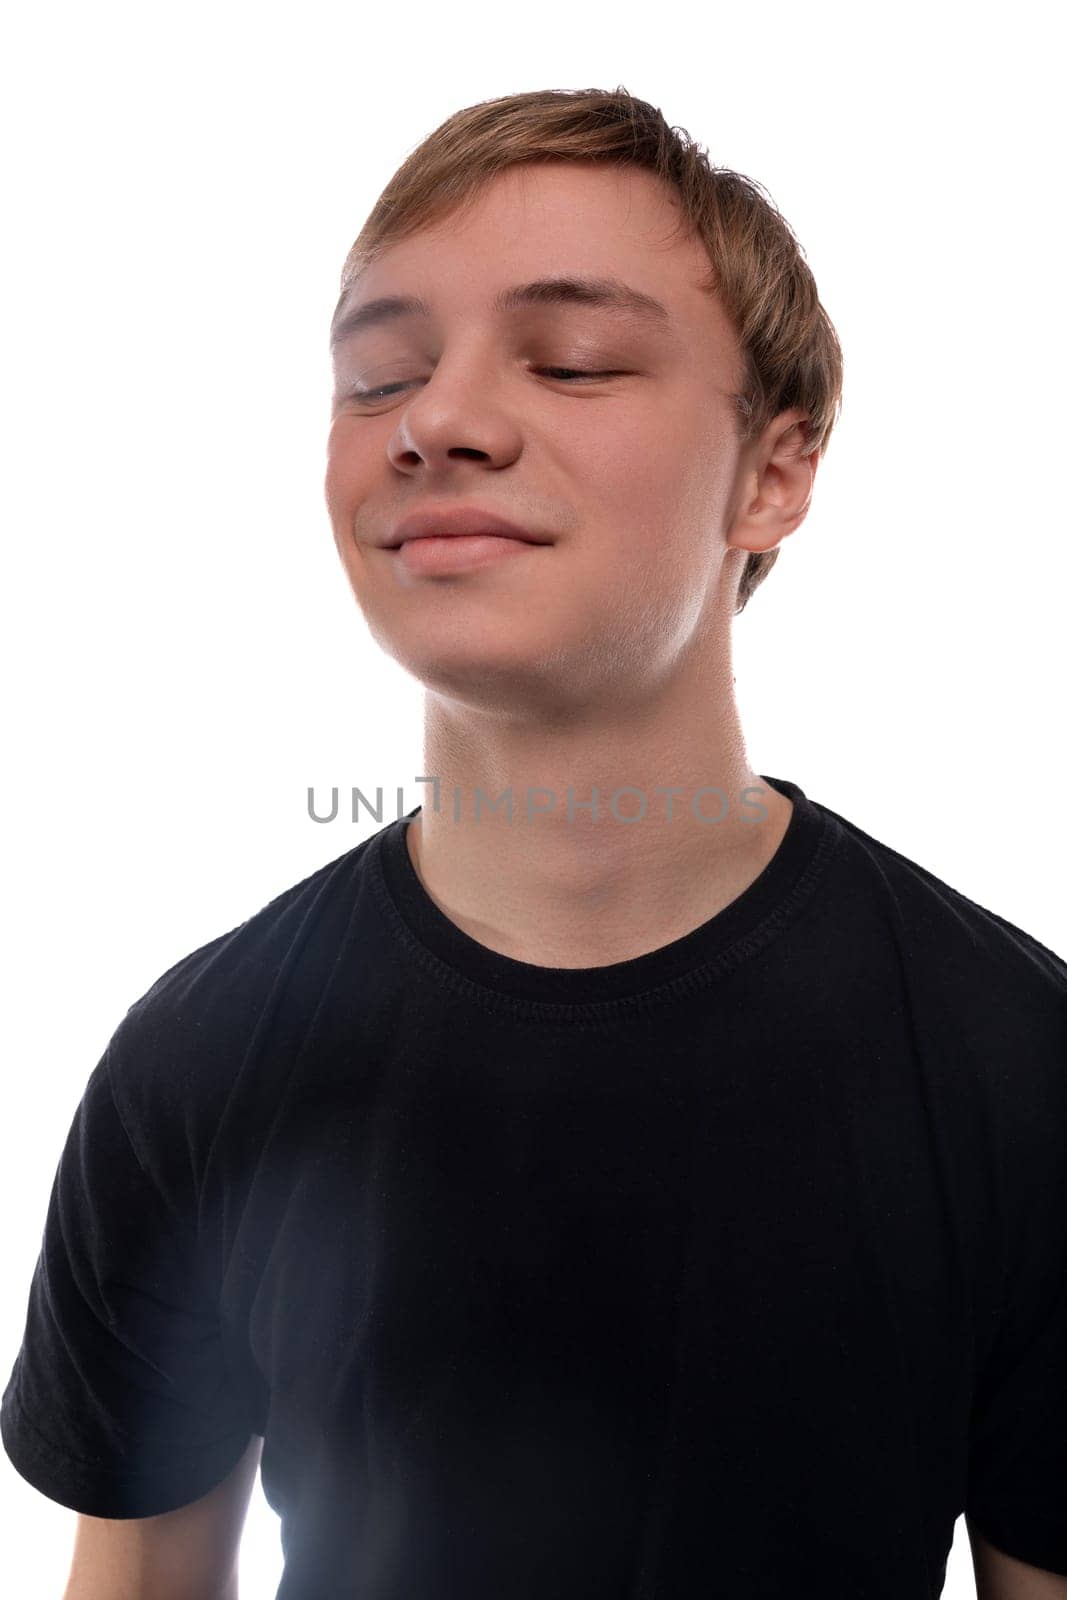 Cute fair-haired teenager guy on a white background, close-up portrait by TRMK